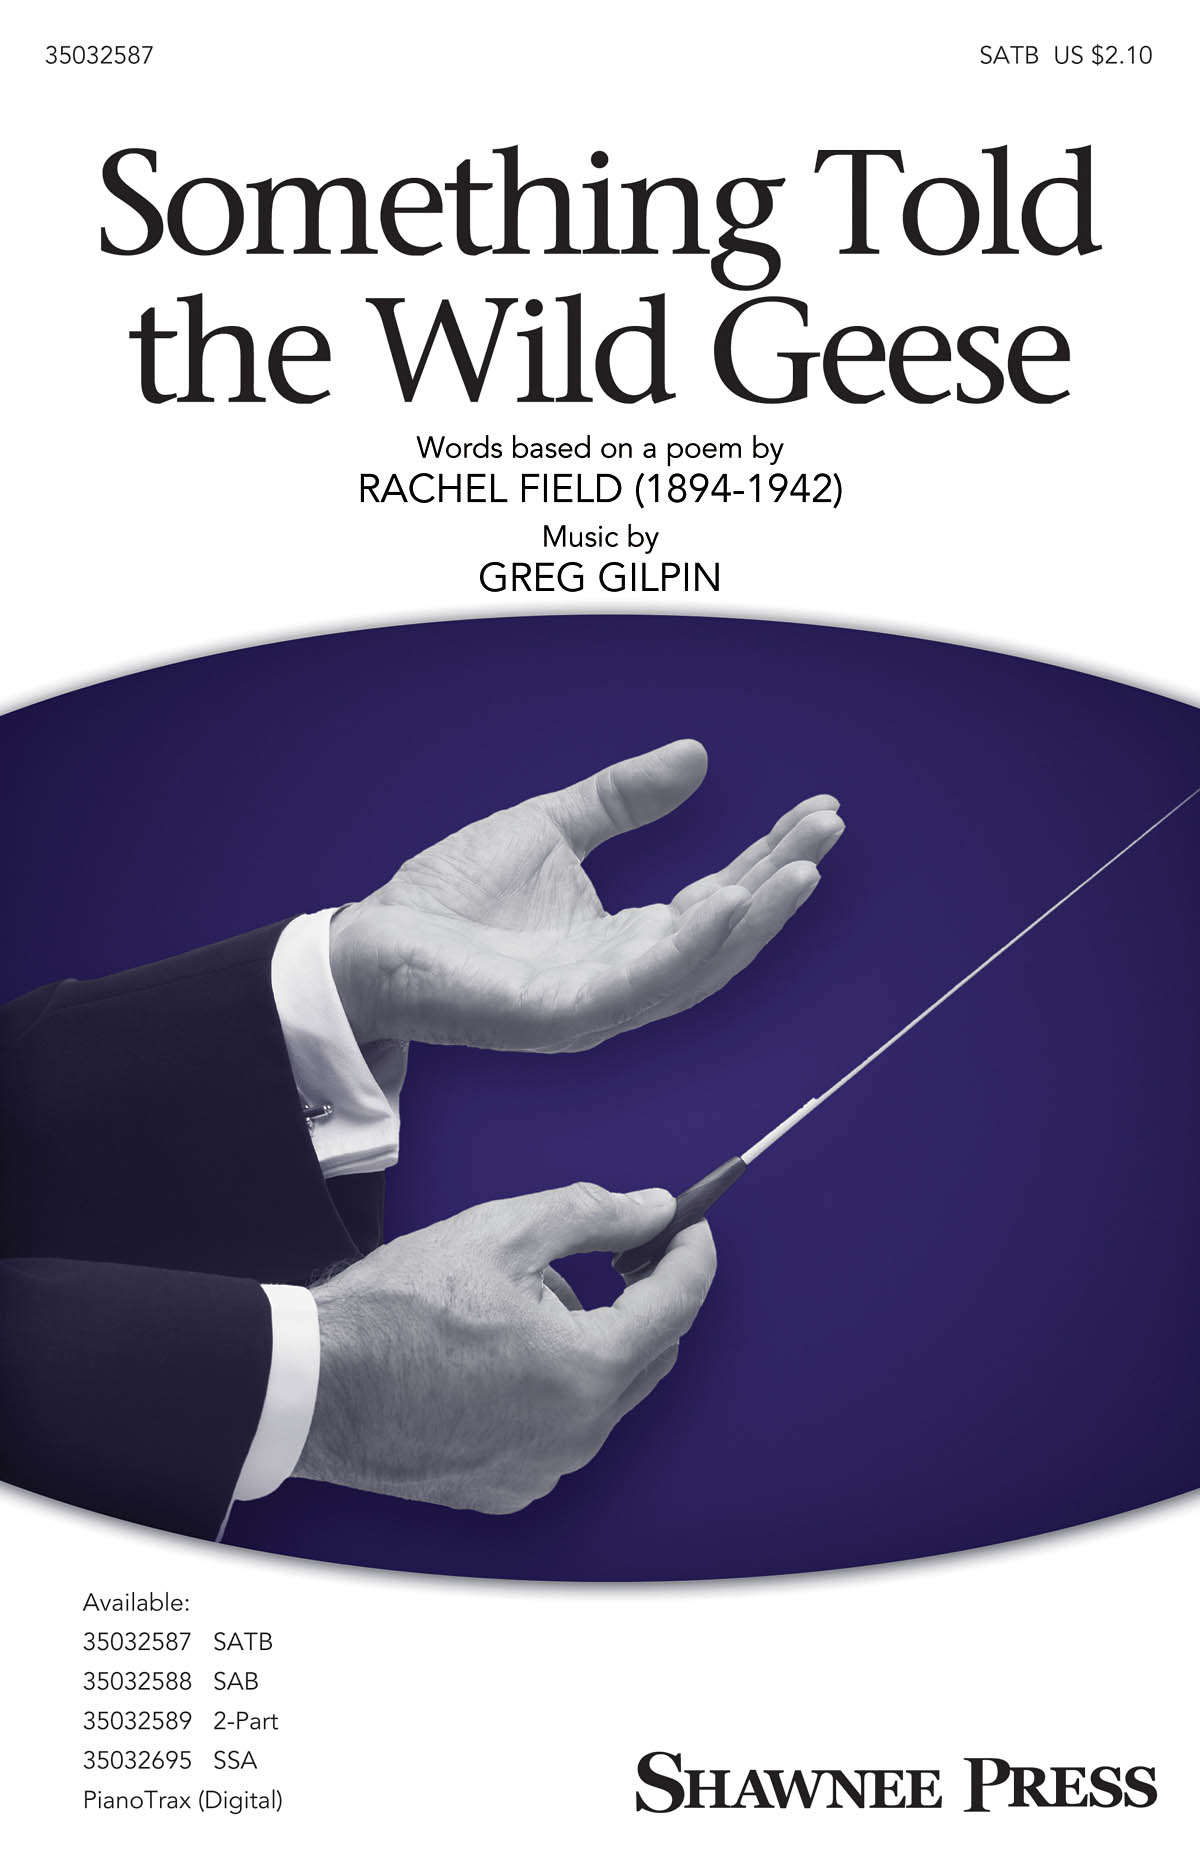 Greg Gilpin: Something Told the Wild Geese: SATB: Vocal Score